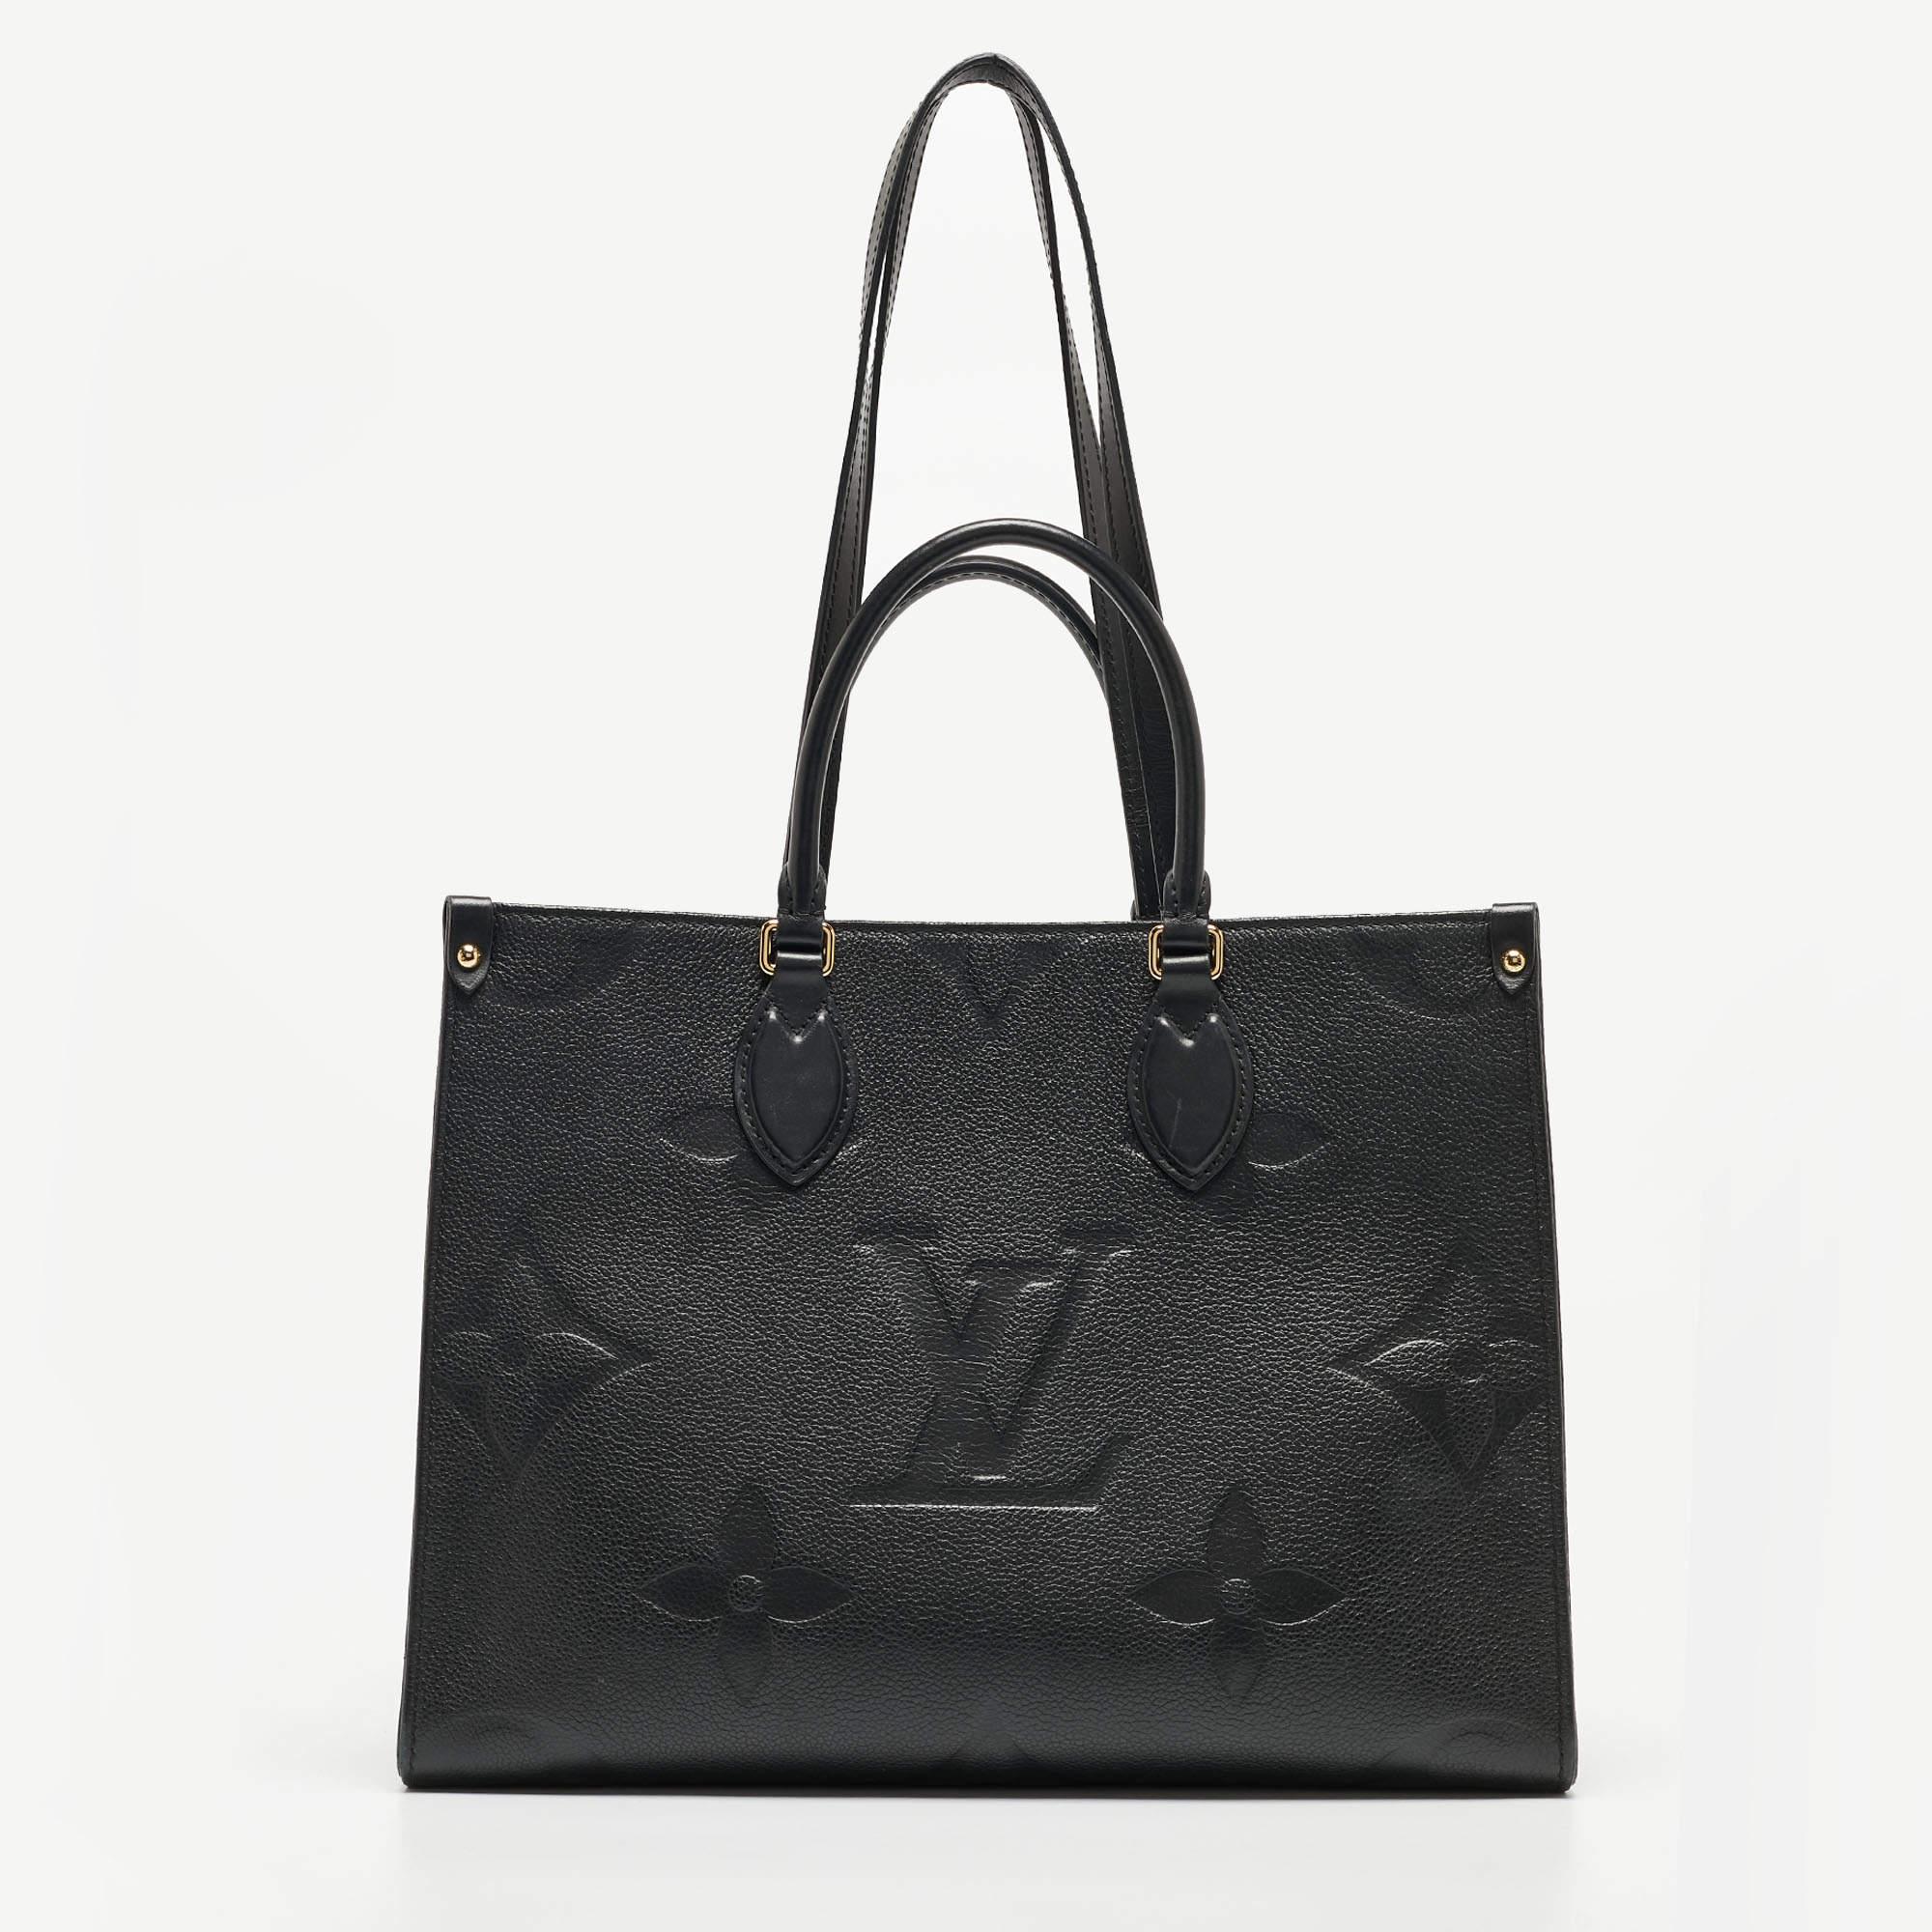 This Onthego bag easily delivers on the sophisticated charm of Louis Vuitton. This creation has been beautifully crafted from Monogram Empreinte leather in black. The interior is lined with Alcantara and sized to hold all your essentials. The bag is